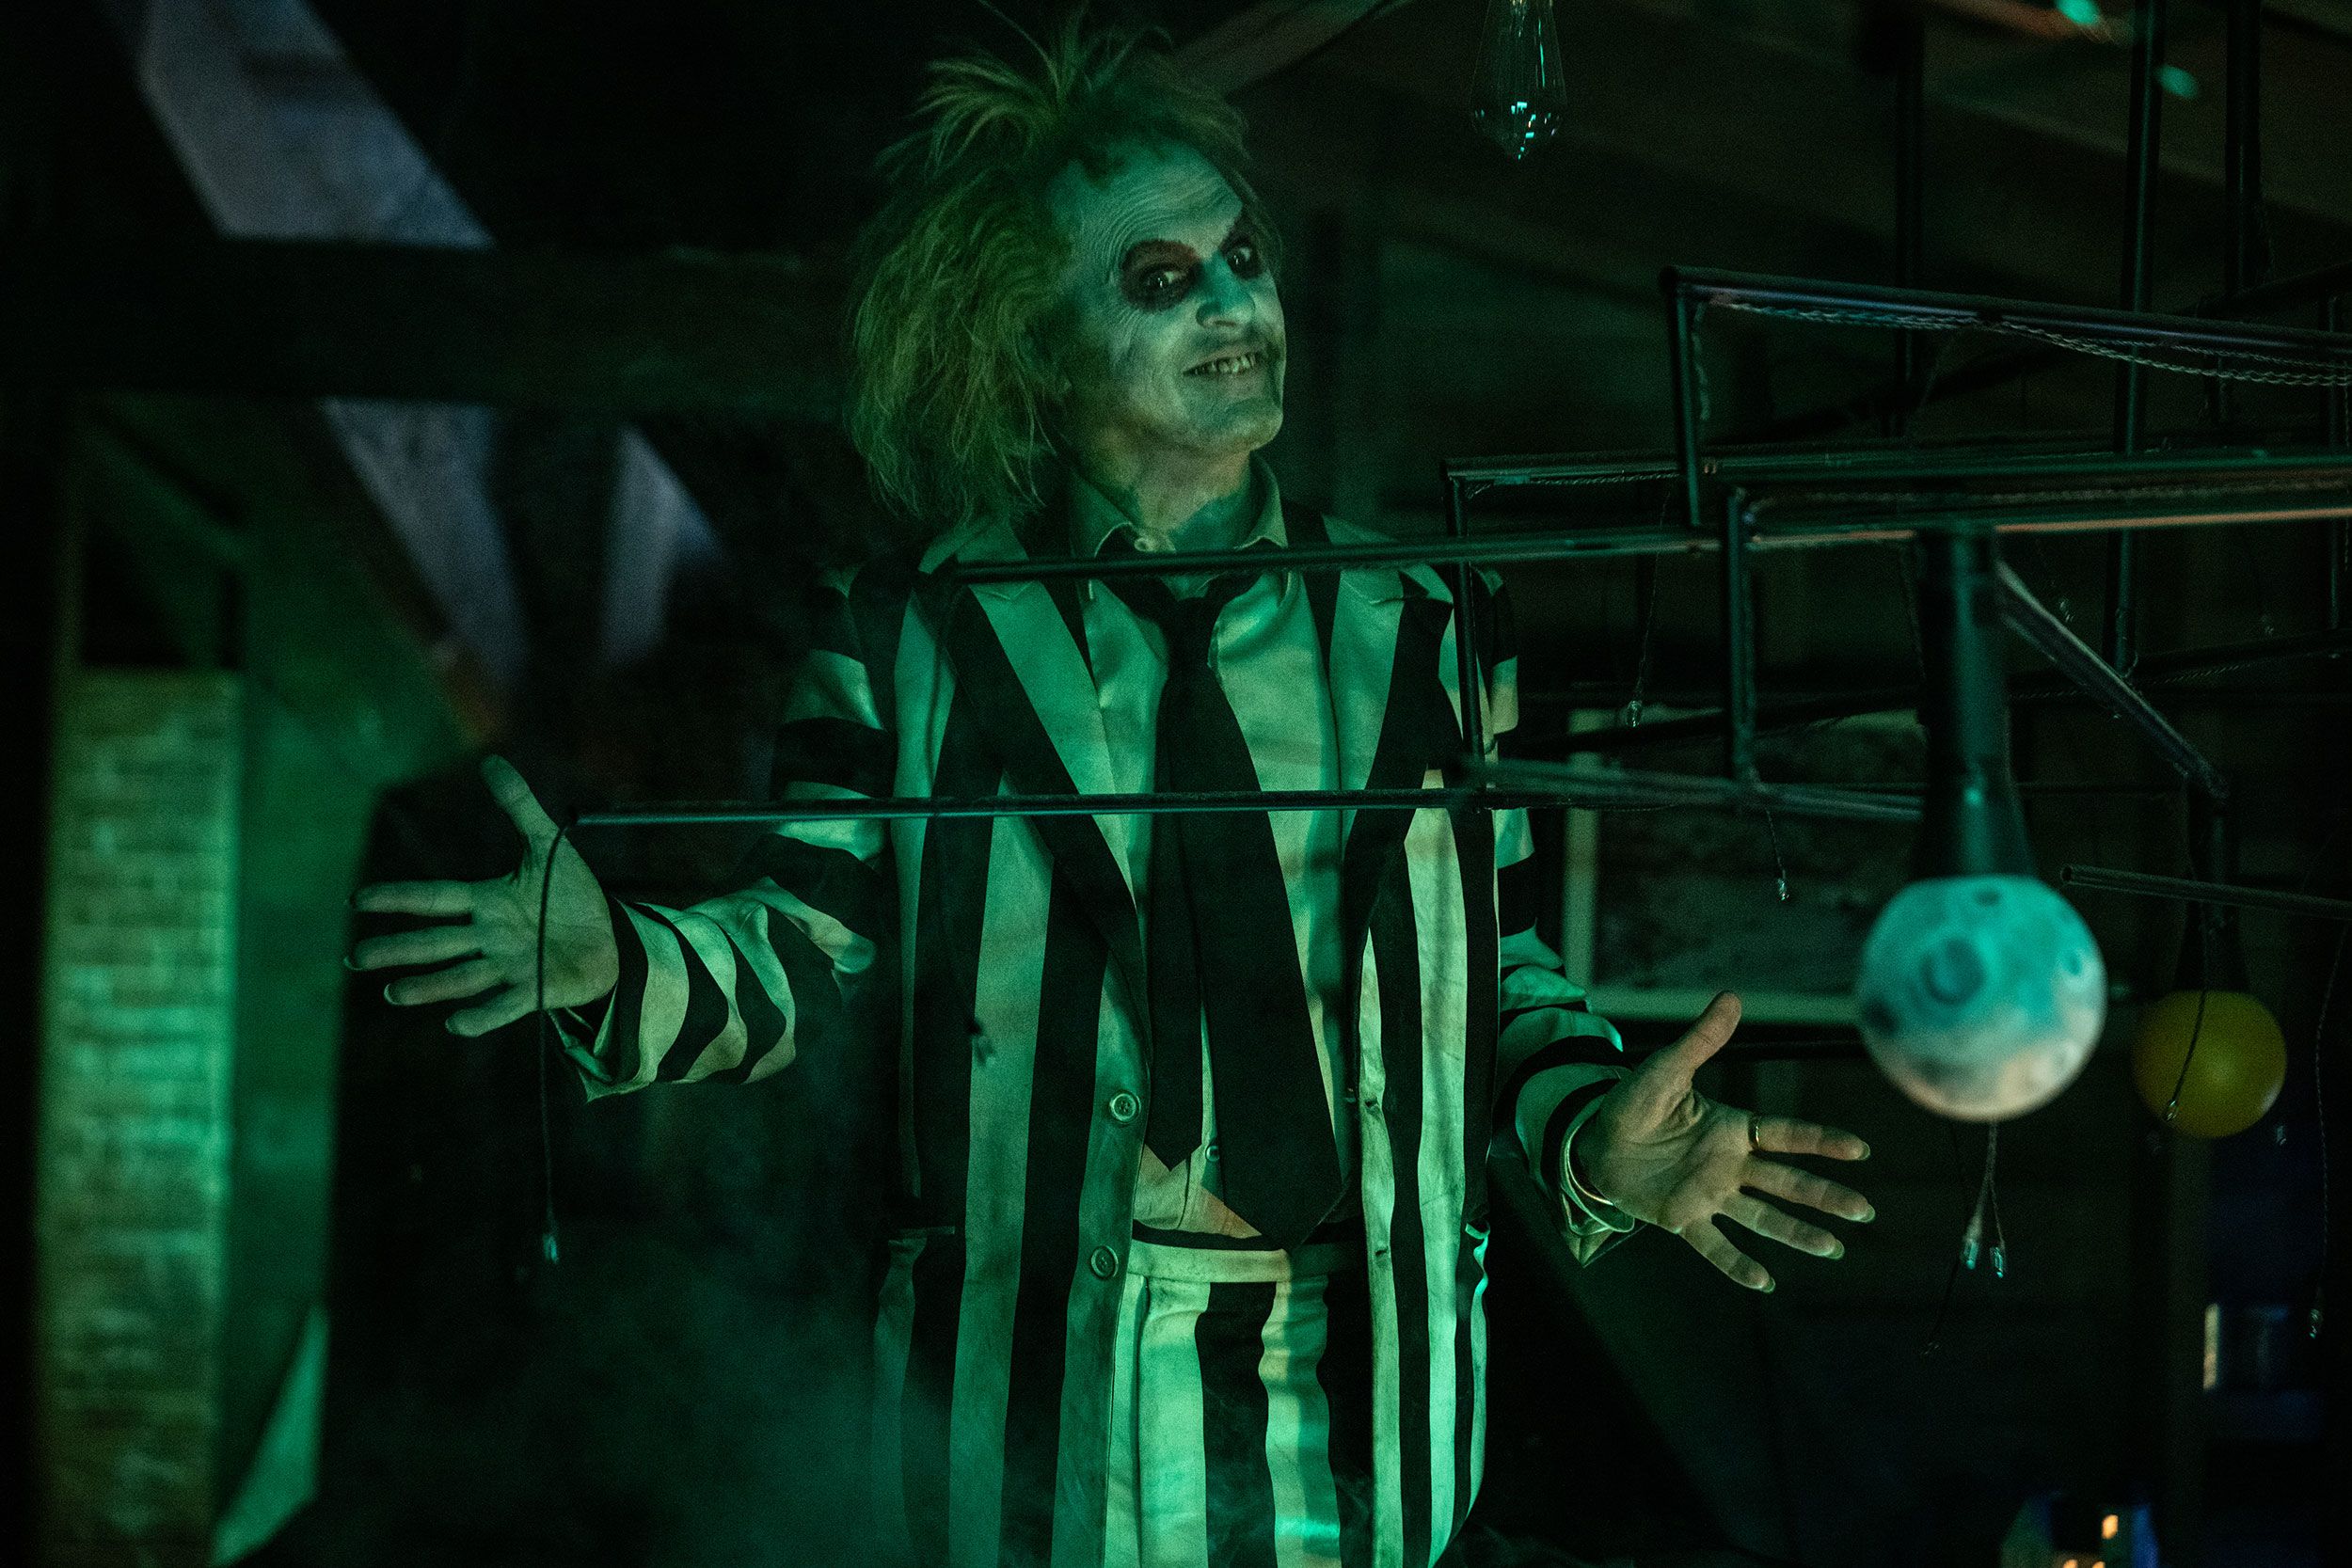 Michael Keaton and Winona Ryder face off once again in ‘Beetlejuice Beetlejuice’ trailer - Entertainment - News